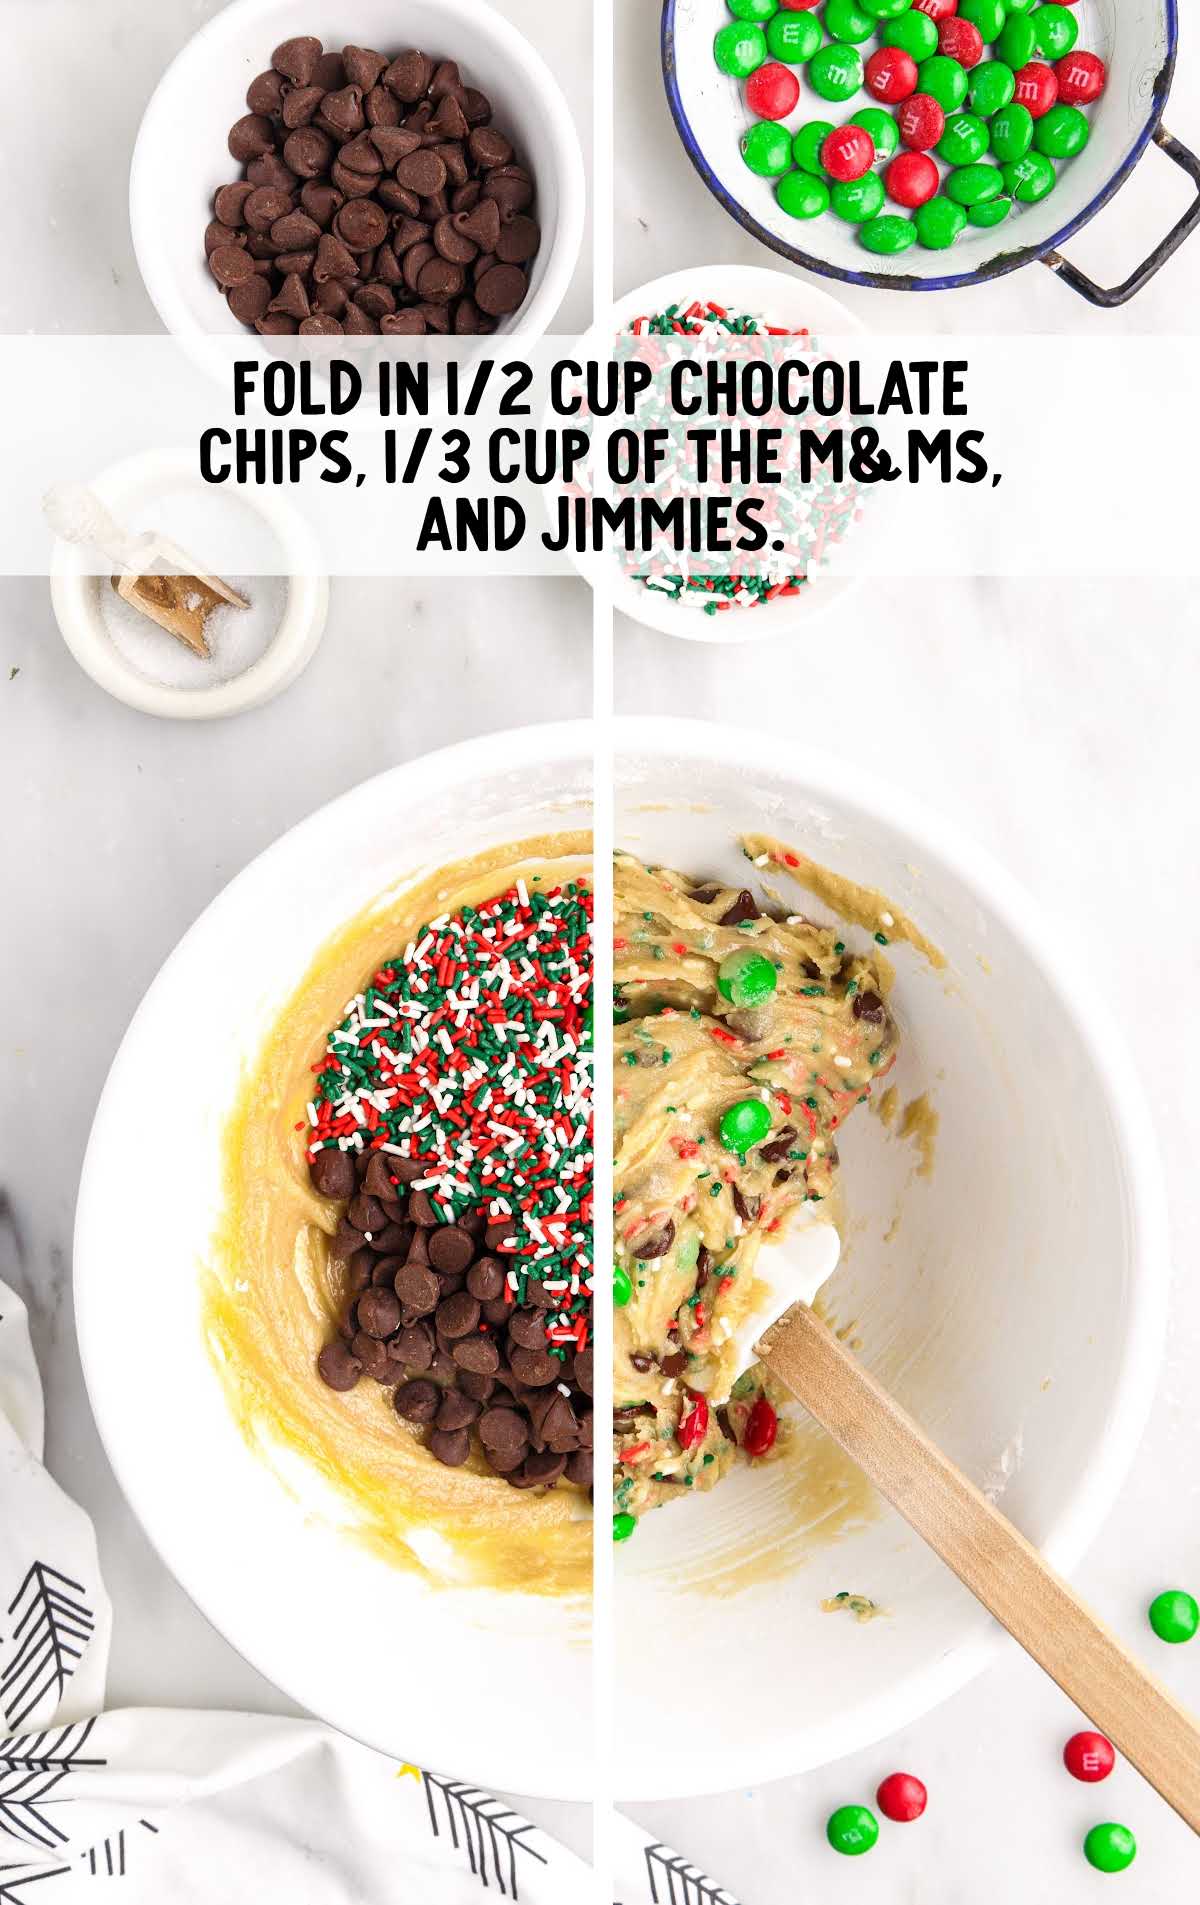 chocolate chips, M&ms and jimmies folded in a bowl